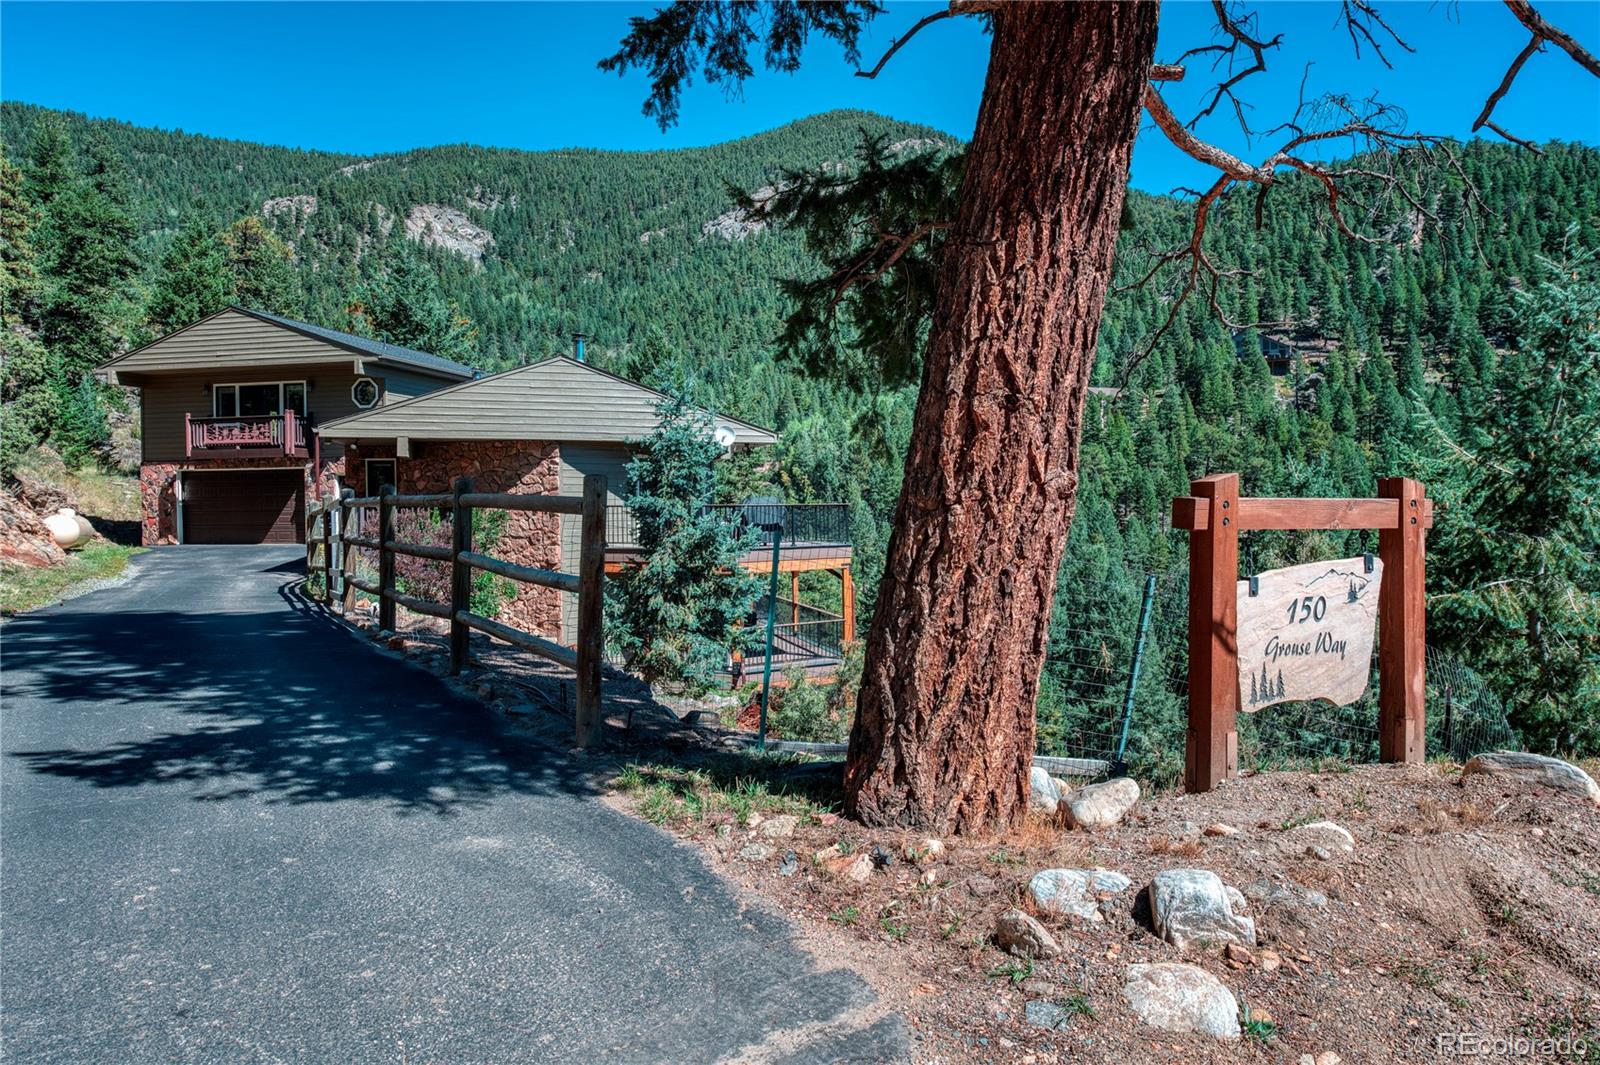 150 Grouse Way, Evergreen, CO 80439 - #: 7752621